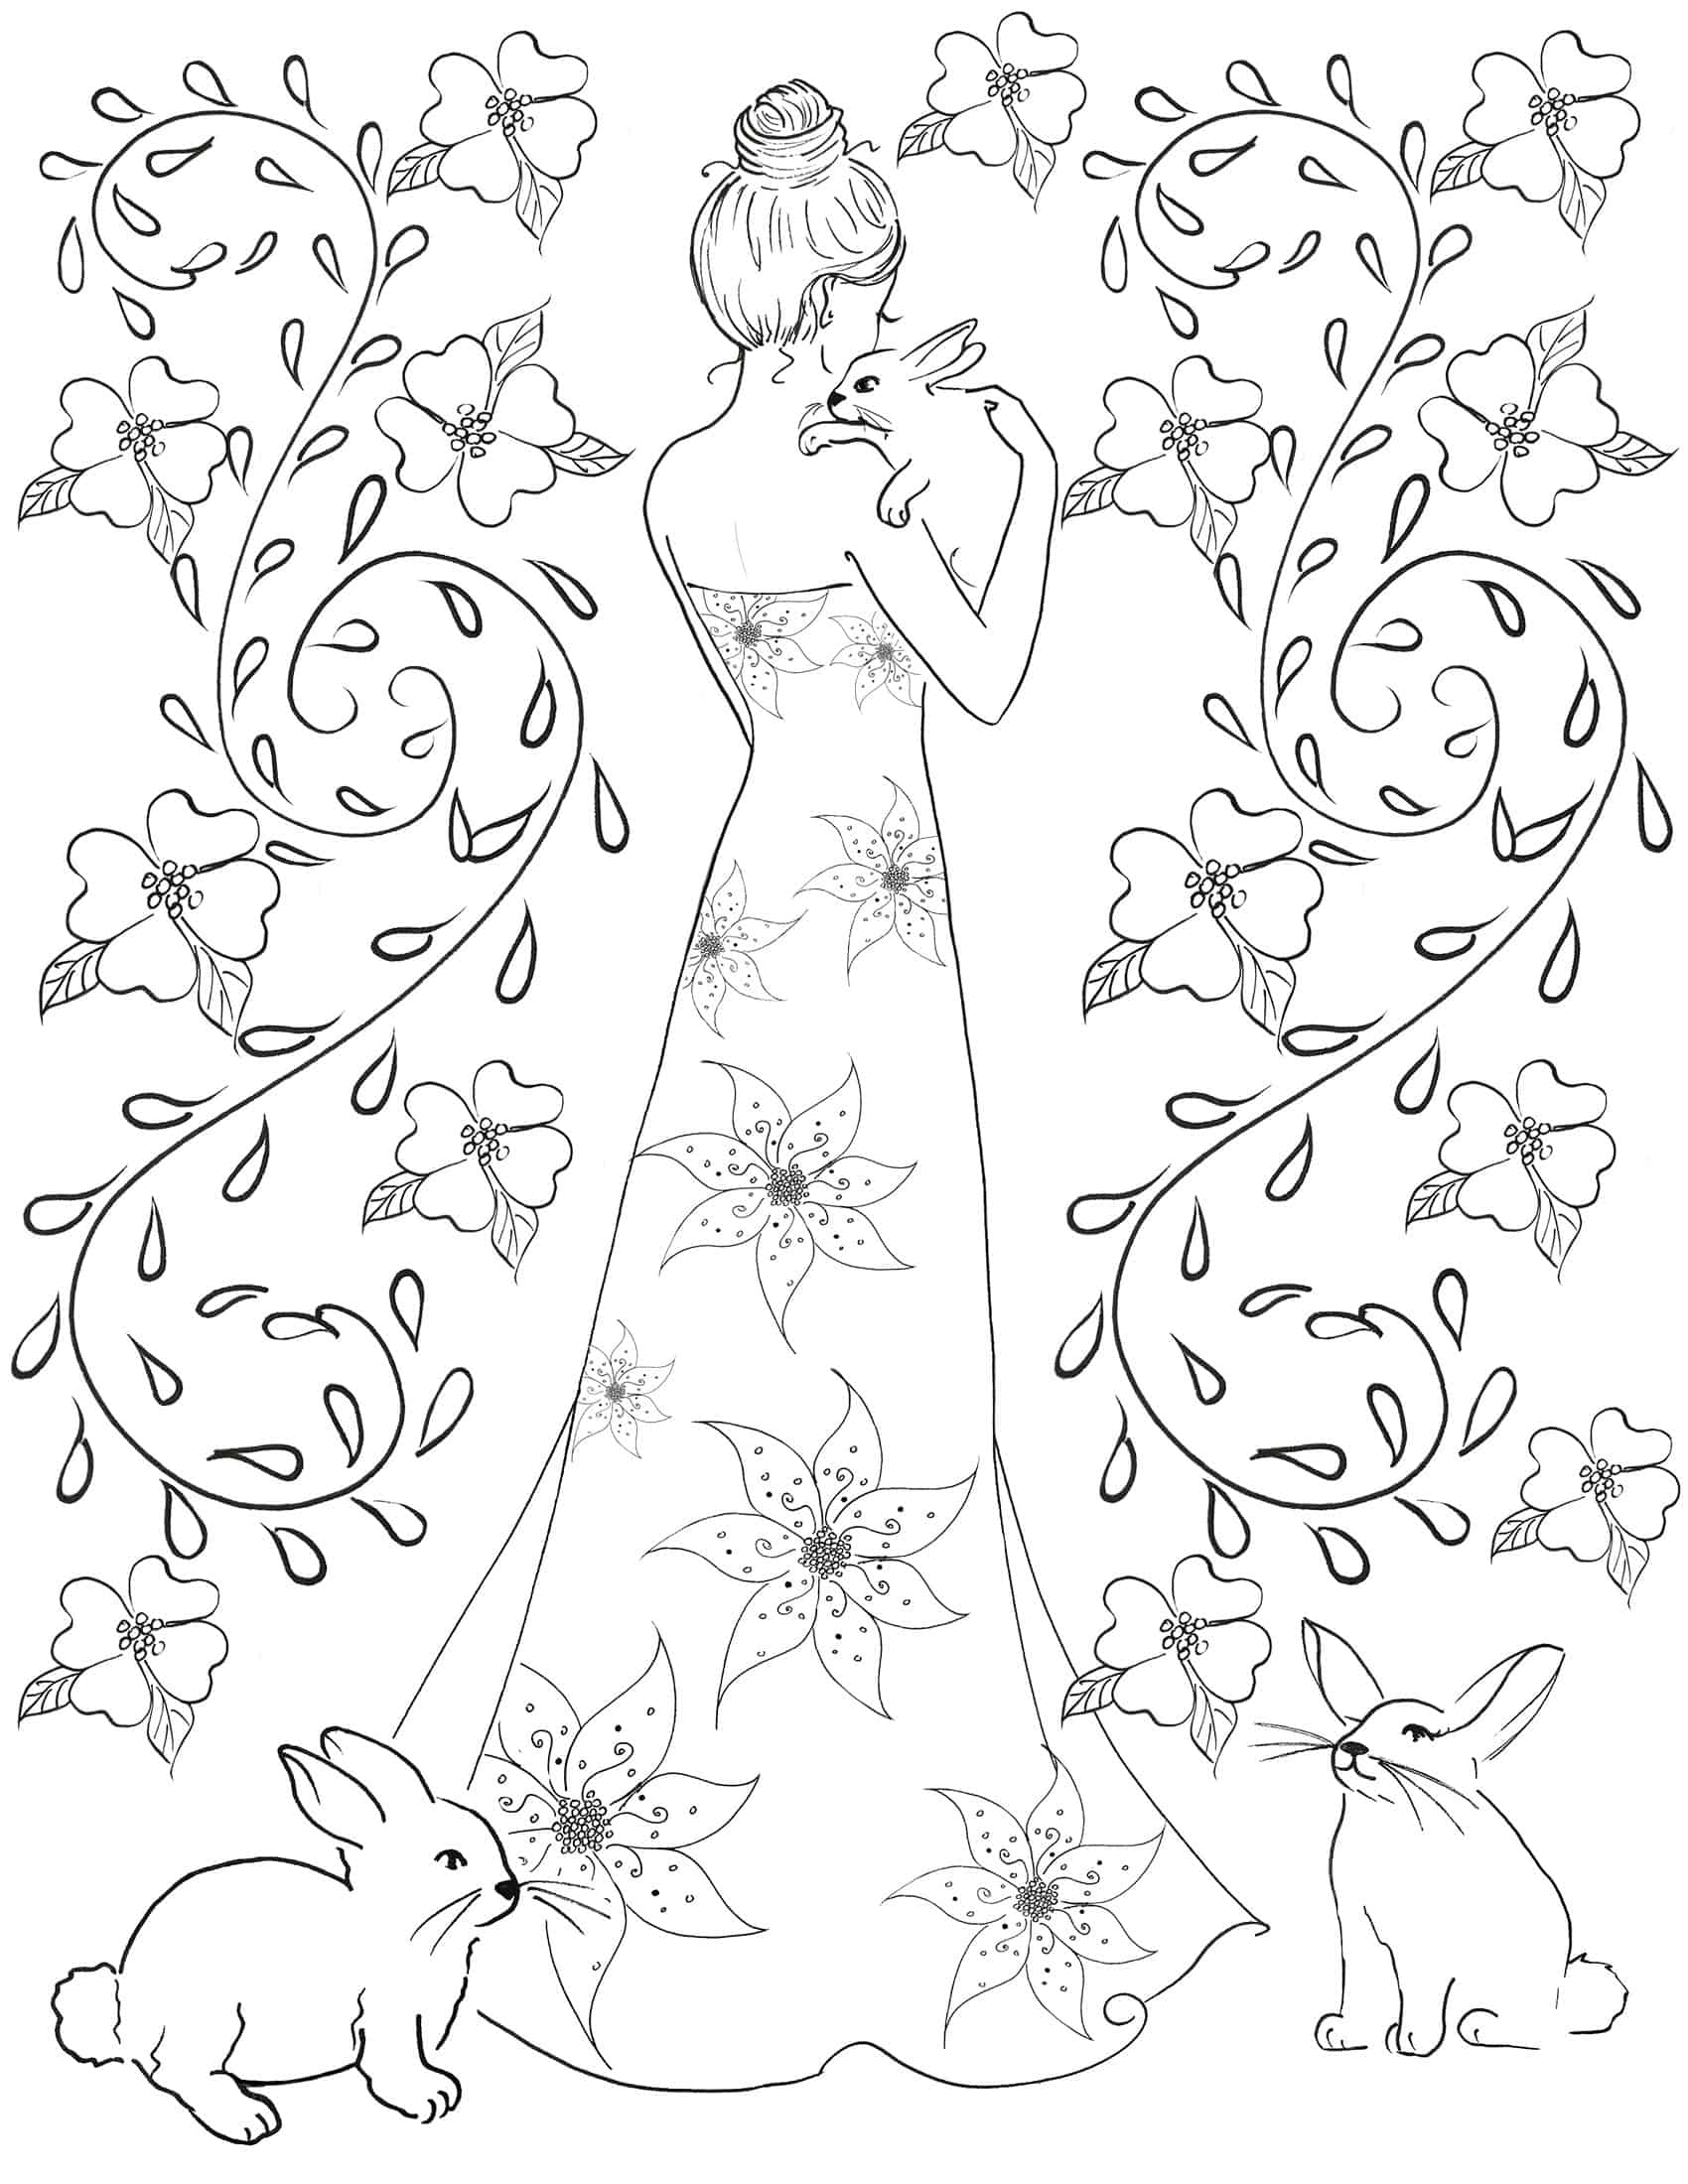 free coloring page, easter bunnies coloring, fashion coloring page